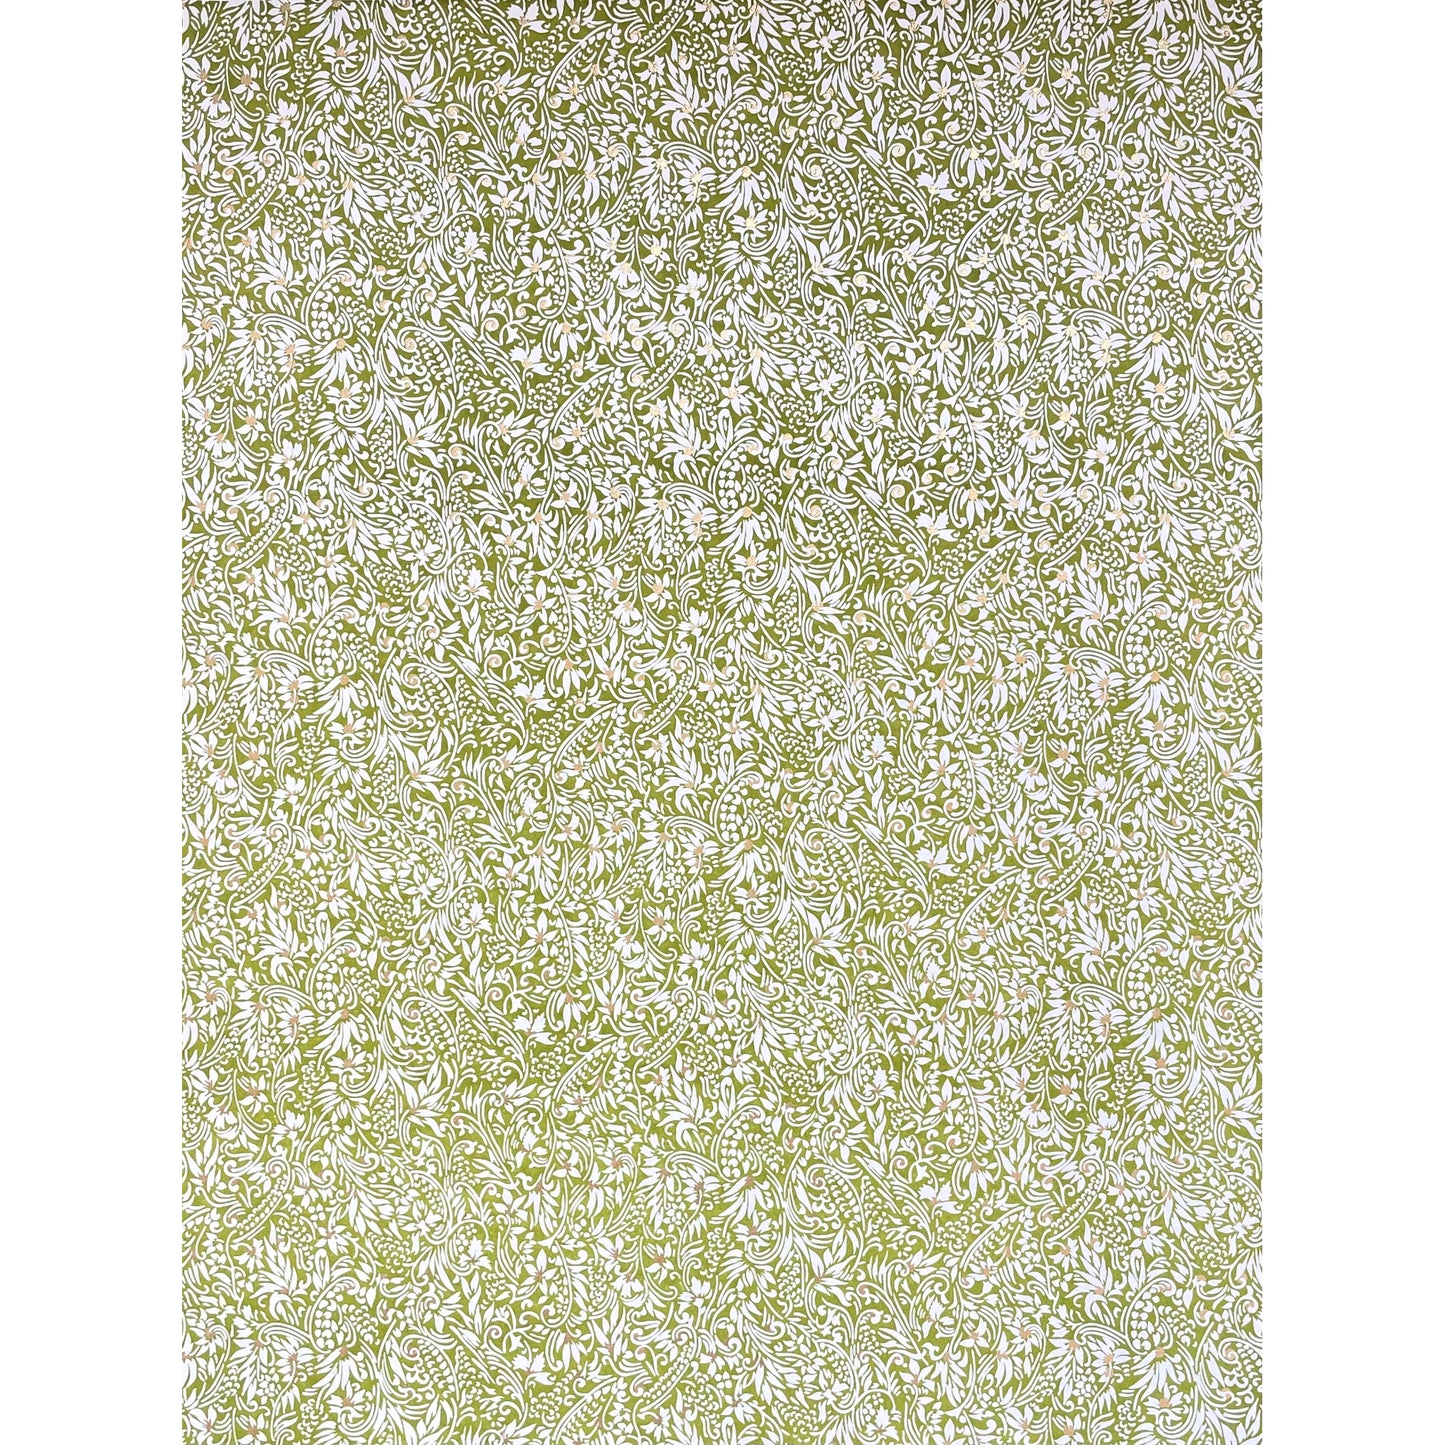 japanese silk-screen handmade paper showing green and white botanical repeat pattern with gold highlights, full sheet view